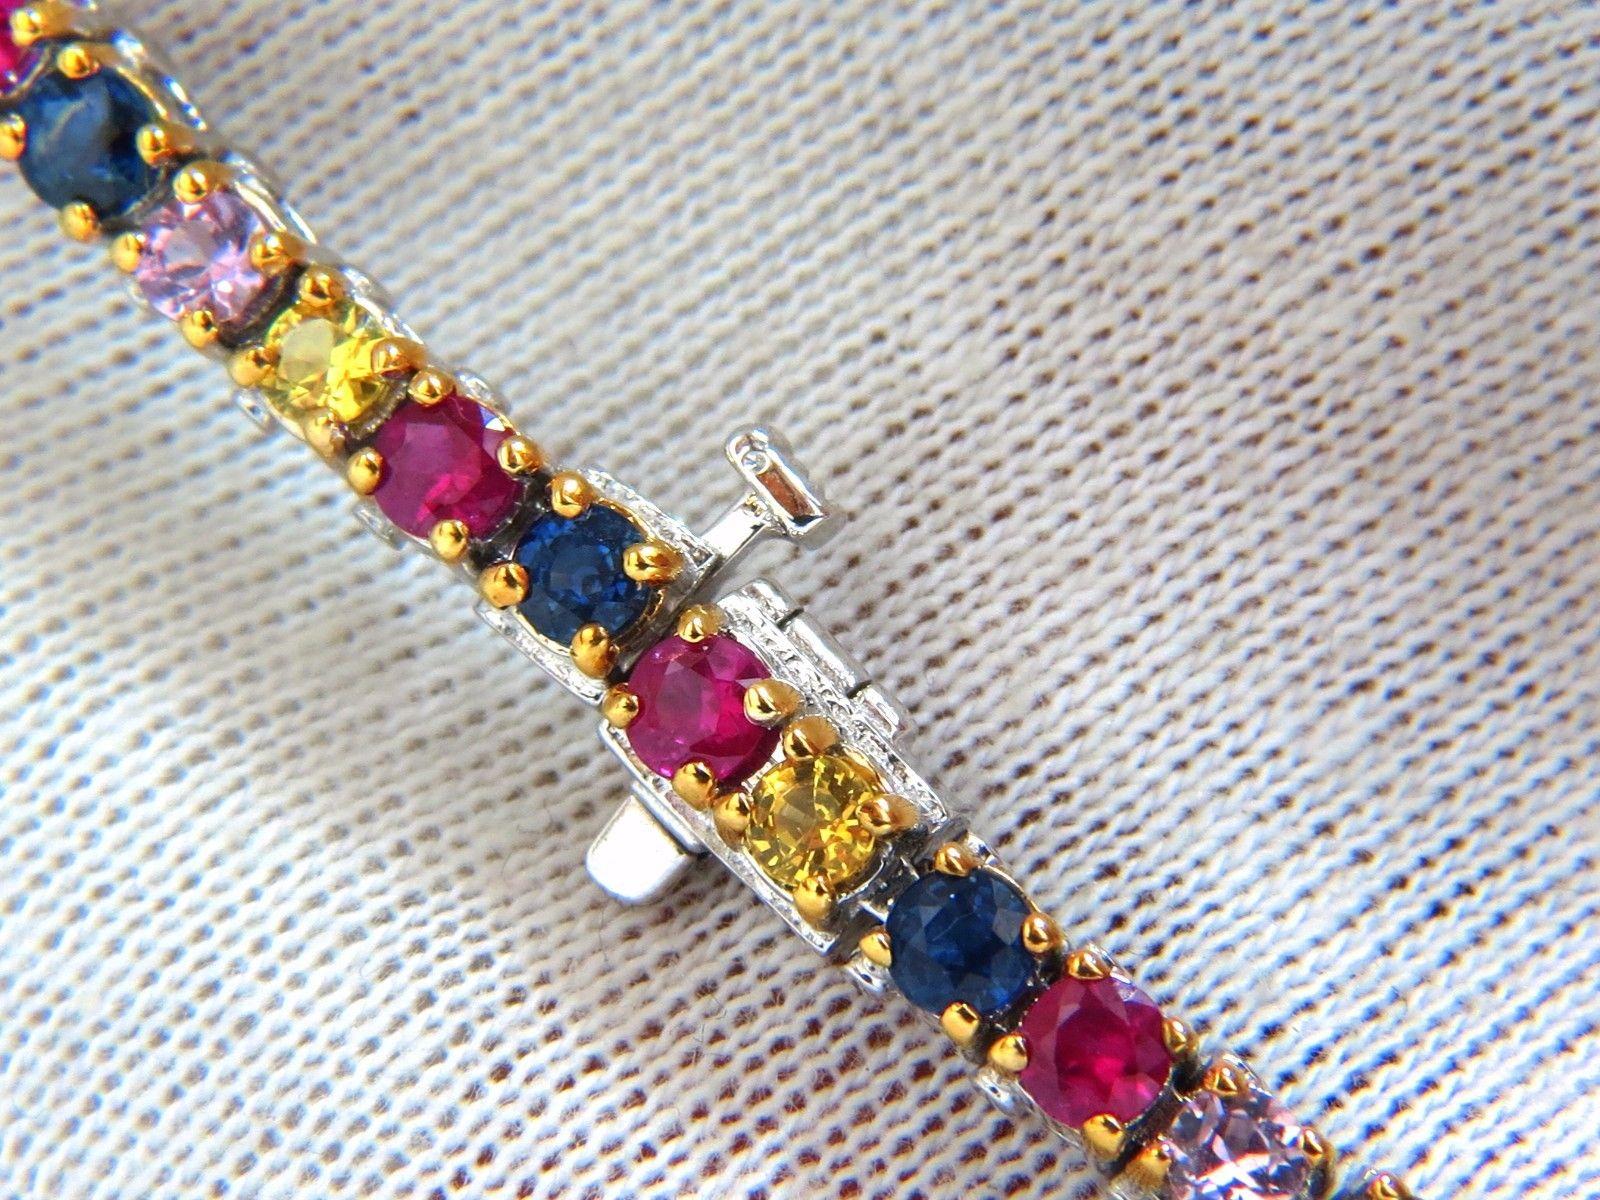 Gem Line.

7.50ct. Natural Sapphires, Ruby, & Emeralds bracelet.

Full round cuts, great sparkle.

Multicolor sapphires.

Vibrant Greens, Orange, Reds, yellows, Blues & Pinks

Clean Clarity & Transparent.

Secure pressure clasp and safety